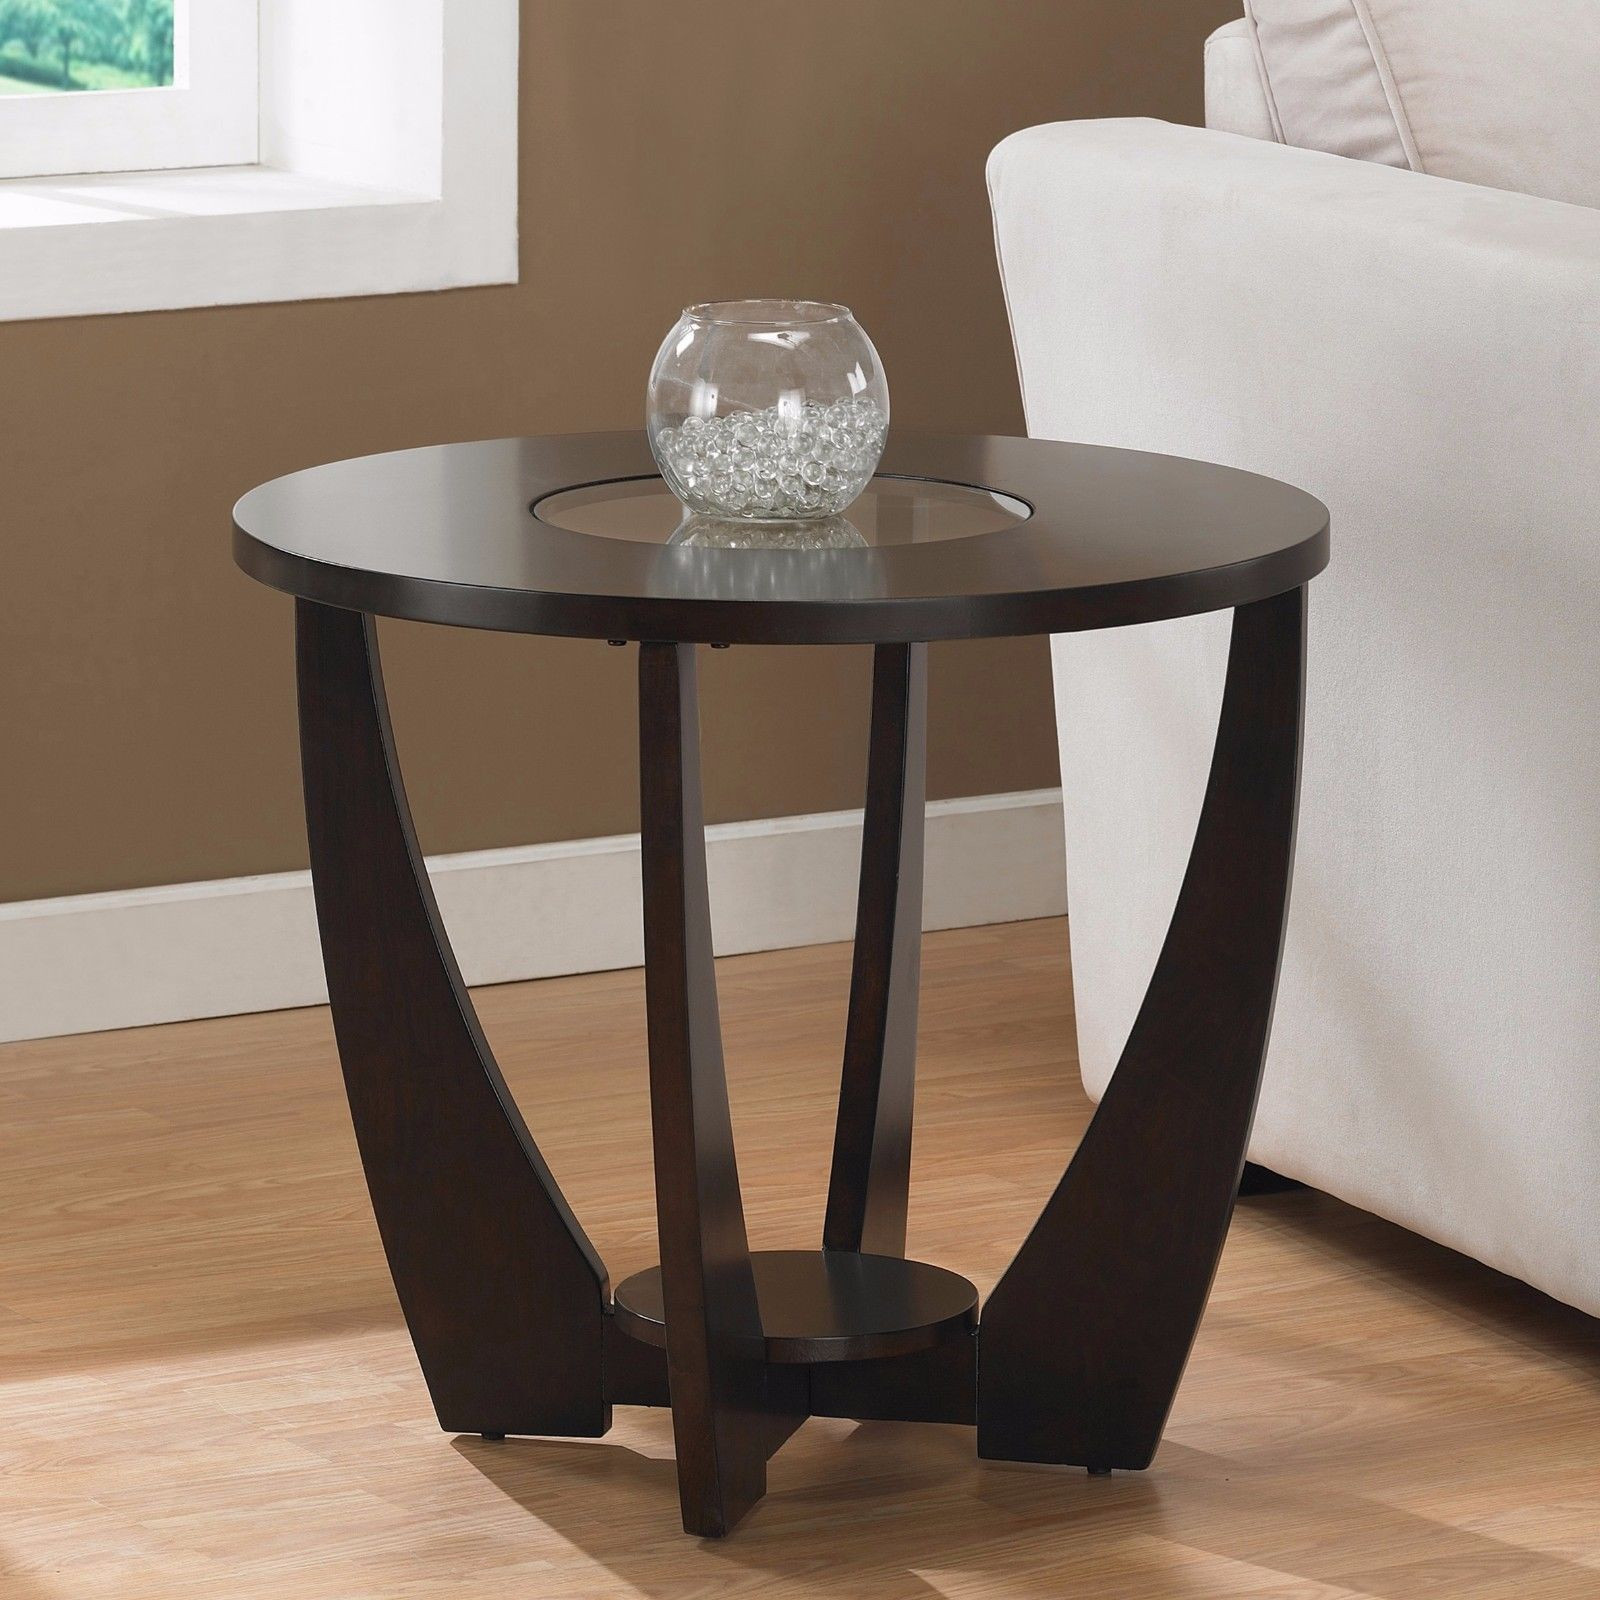 Round Living Room Table
 Dark Brown Round End Table with Glass Top Living Room